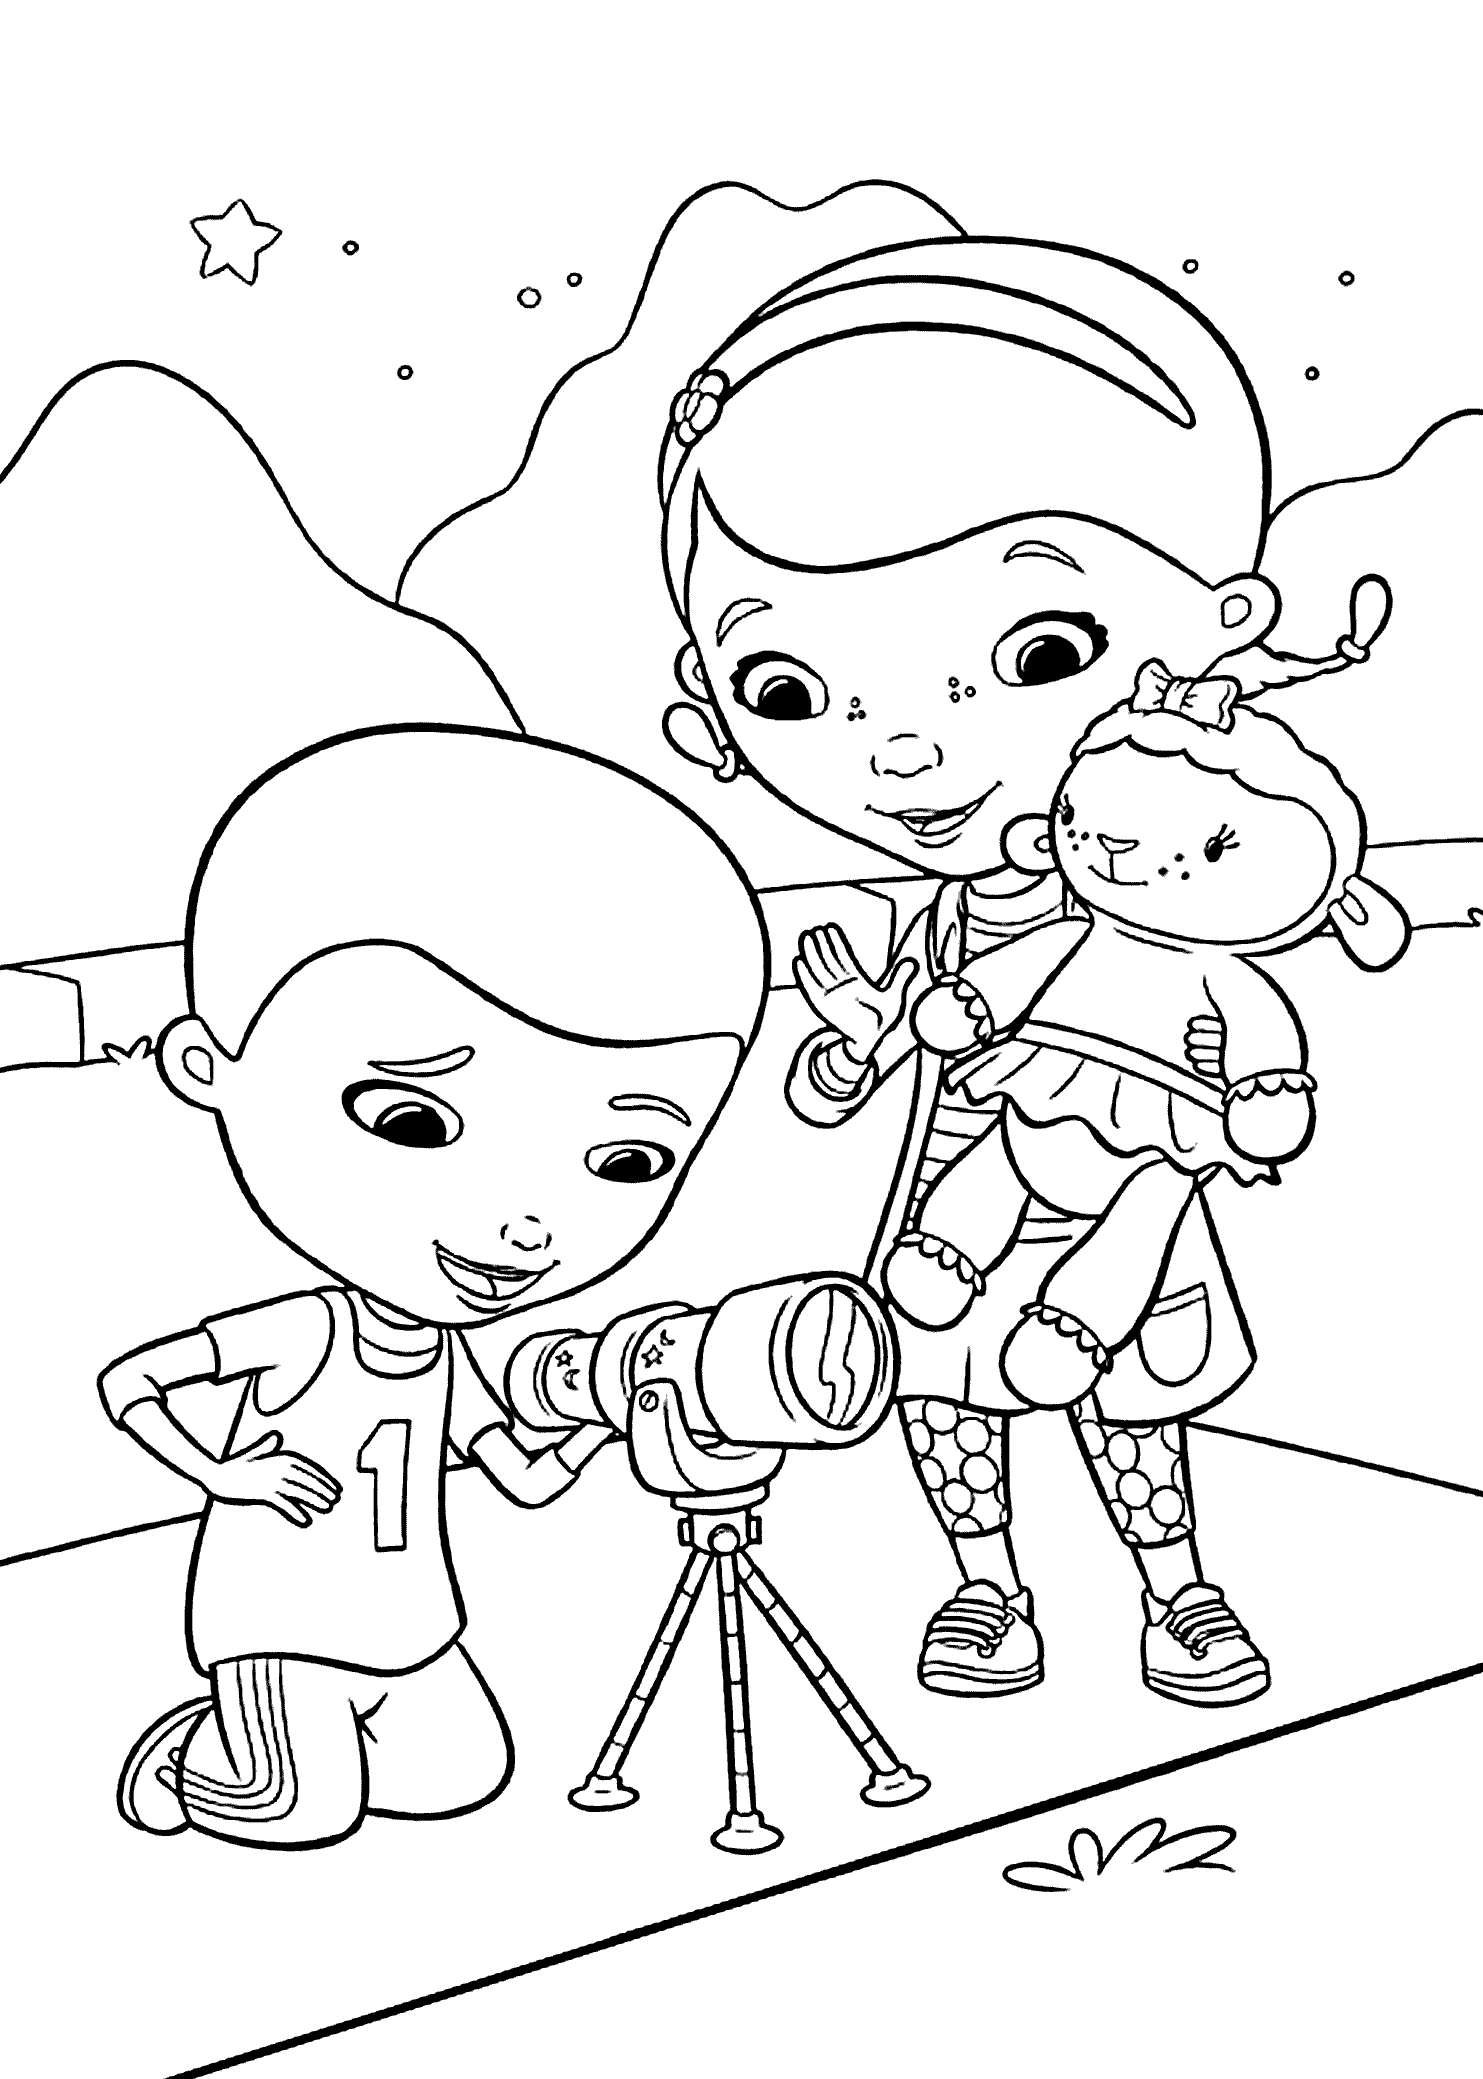 Free Printable Coloring Pages For Kids Disney Spyglass ...